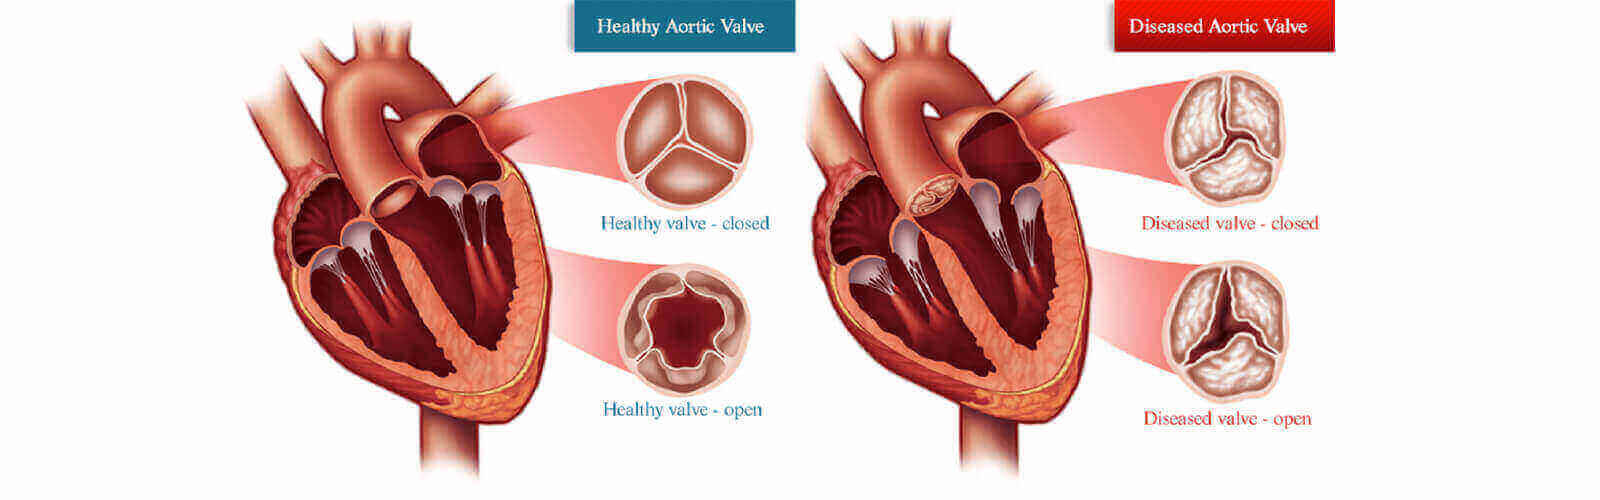 Heart Valve Replacement Surgery in Malawi